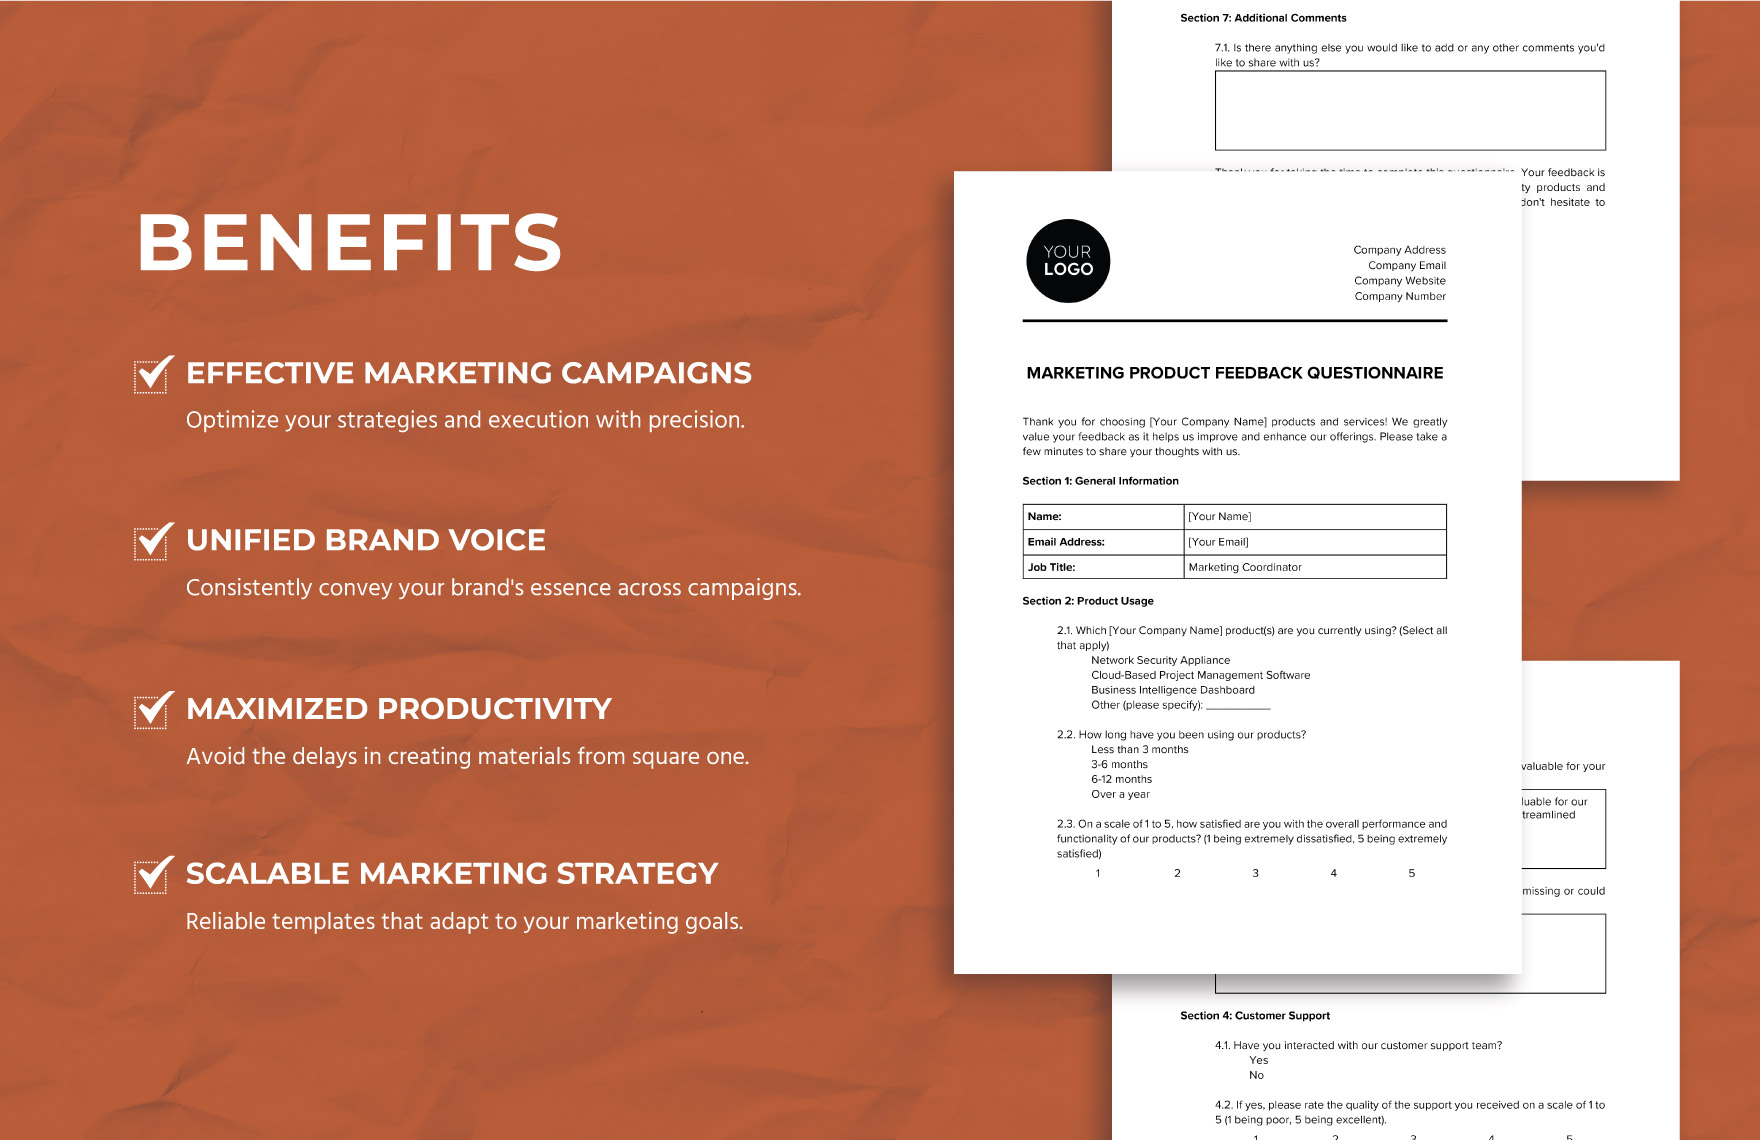 Marketing Product Feedback Questionnaire Template